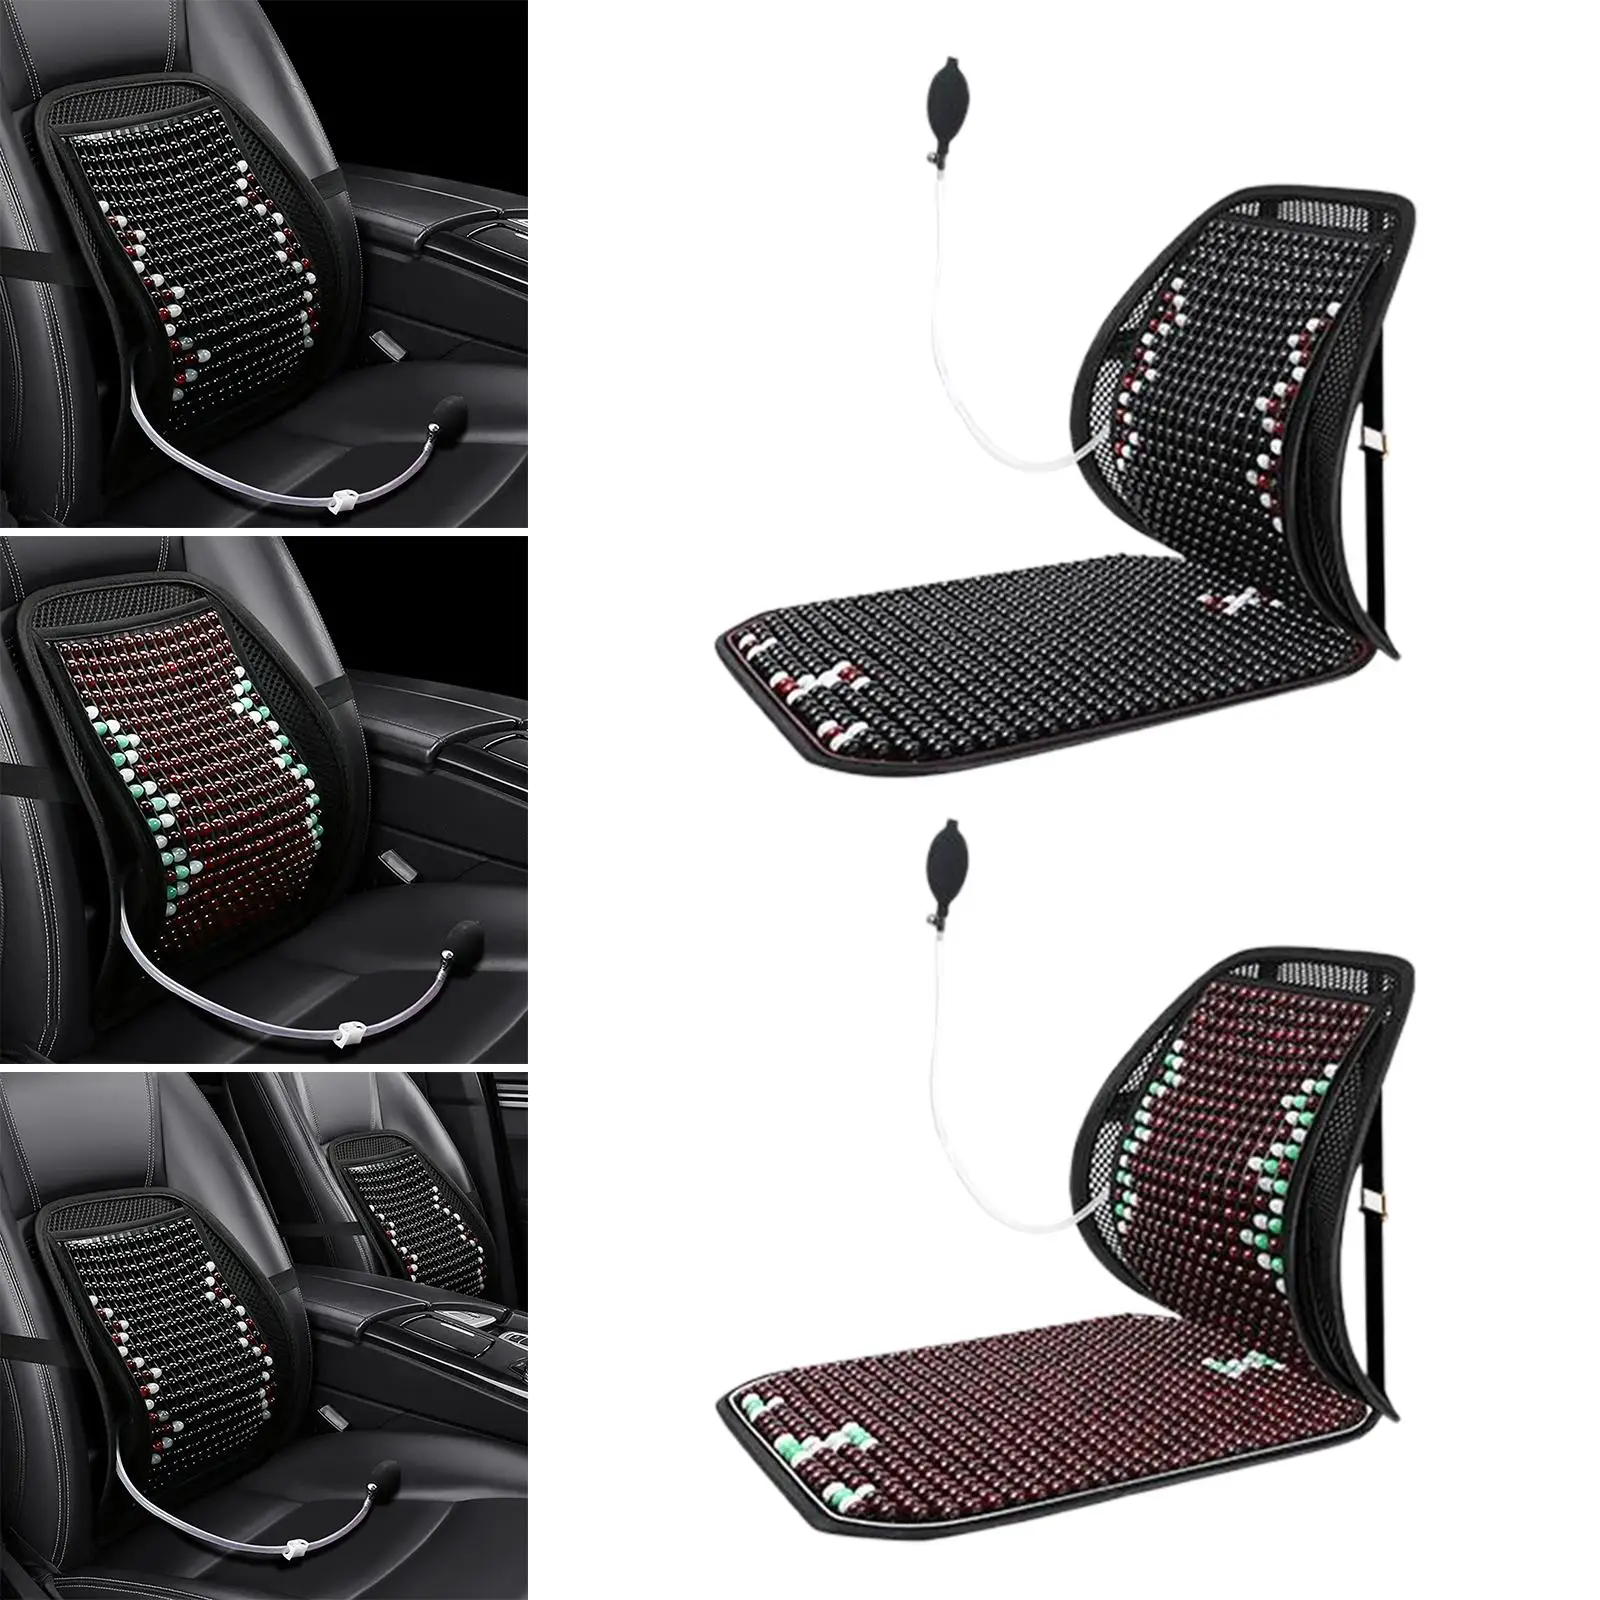 Wood Bead Automotive Seat Covers Massage Cushion Air Inflation Design Exquisite Workmanship Sturdy Breathable Mesh Anti Slip